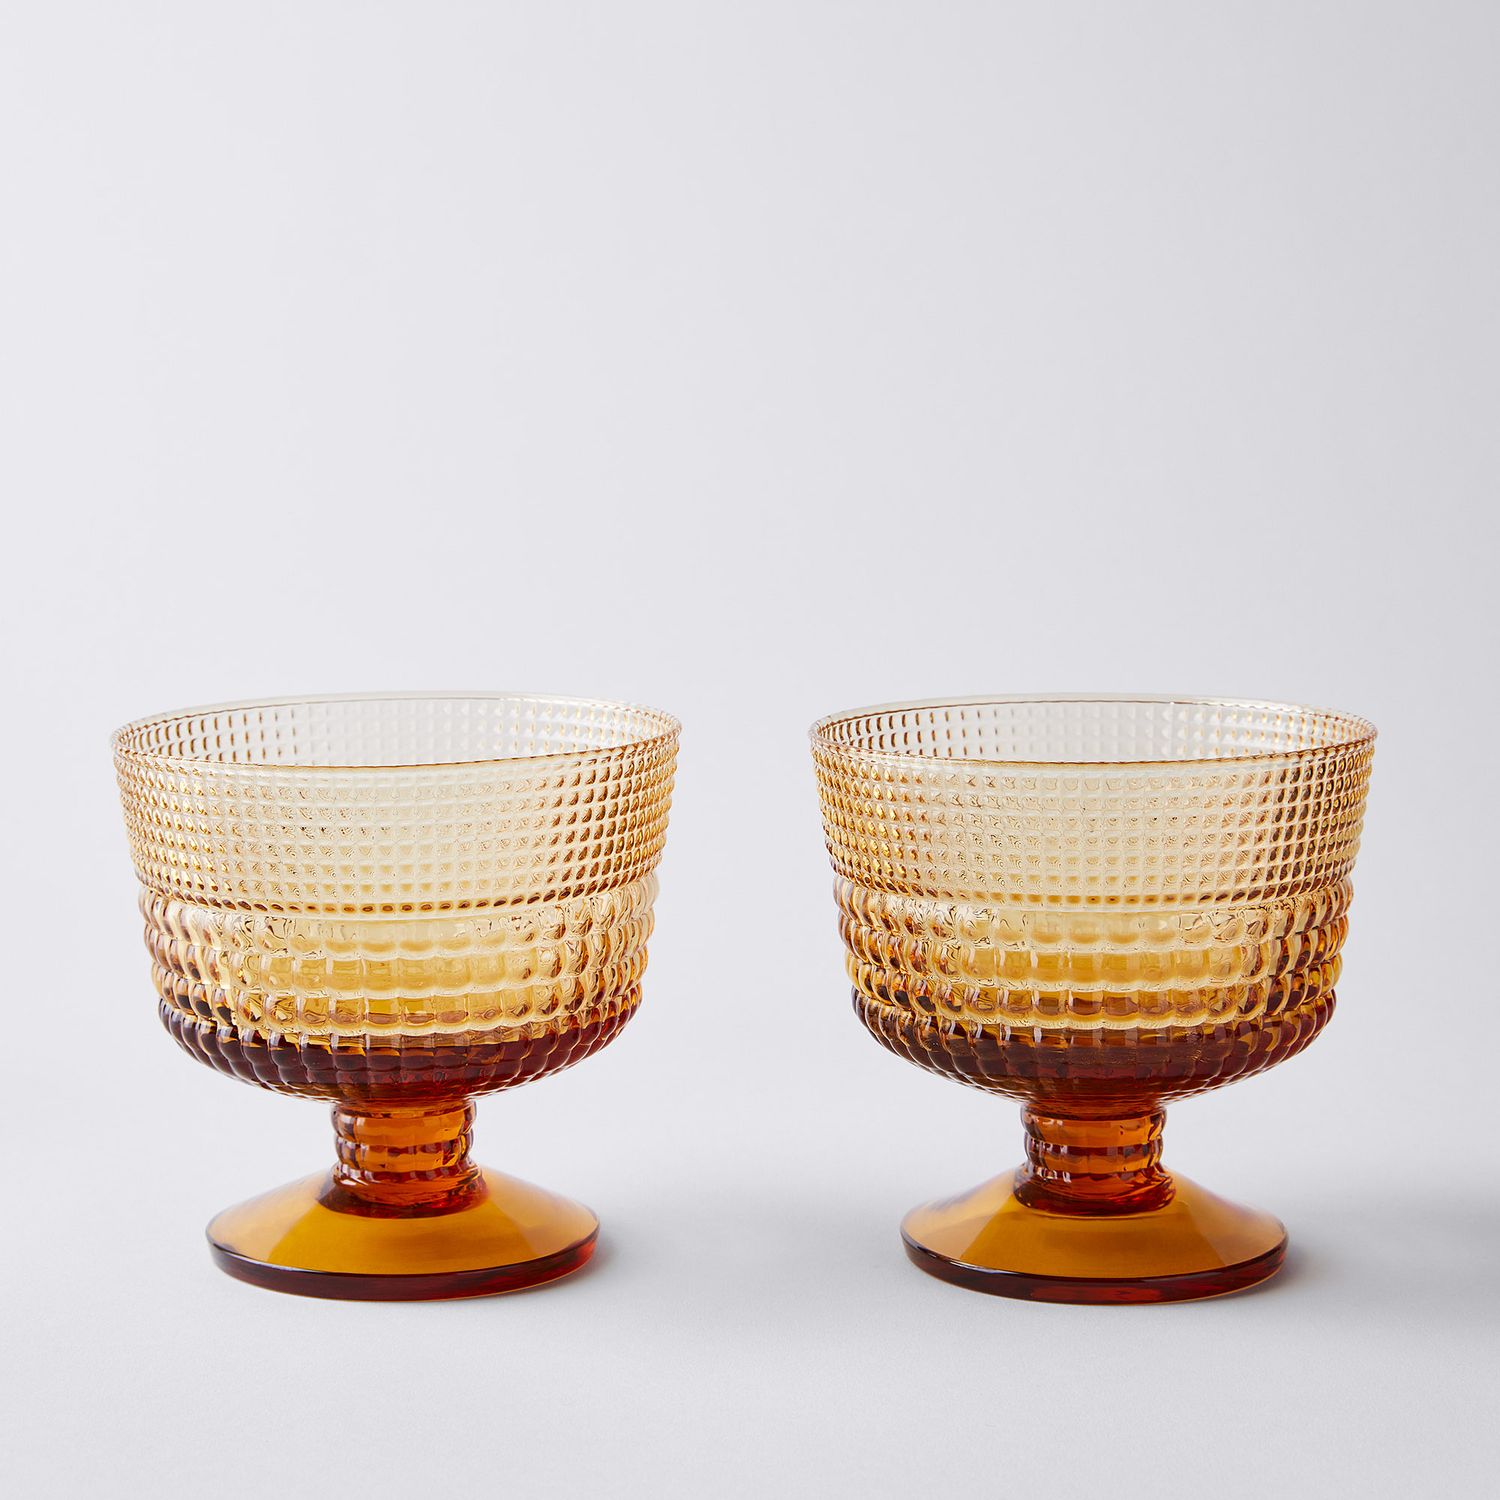 IVV Retro Italian Goblets, Set of 2, 6 Colors, Mouth-Blown Glass on Food52